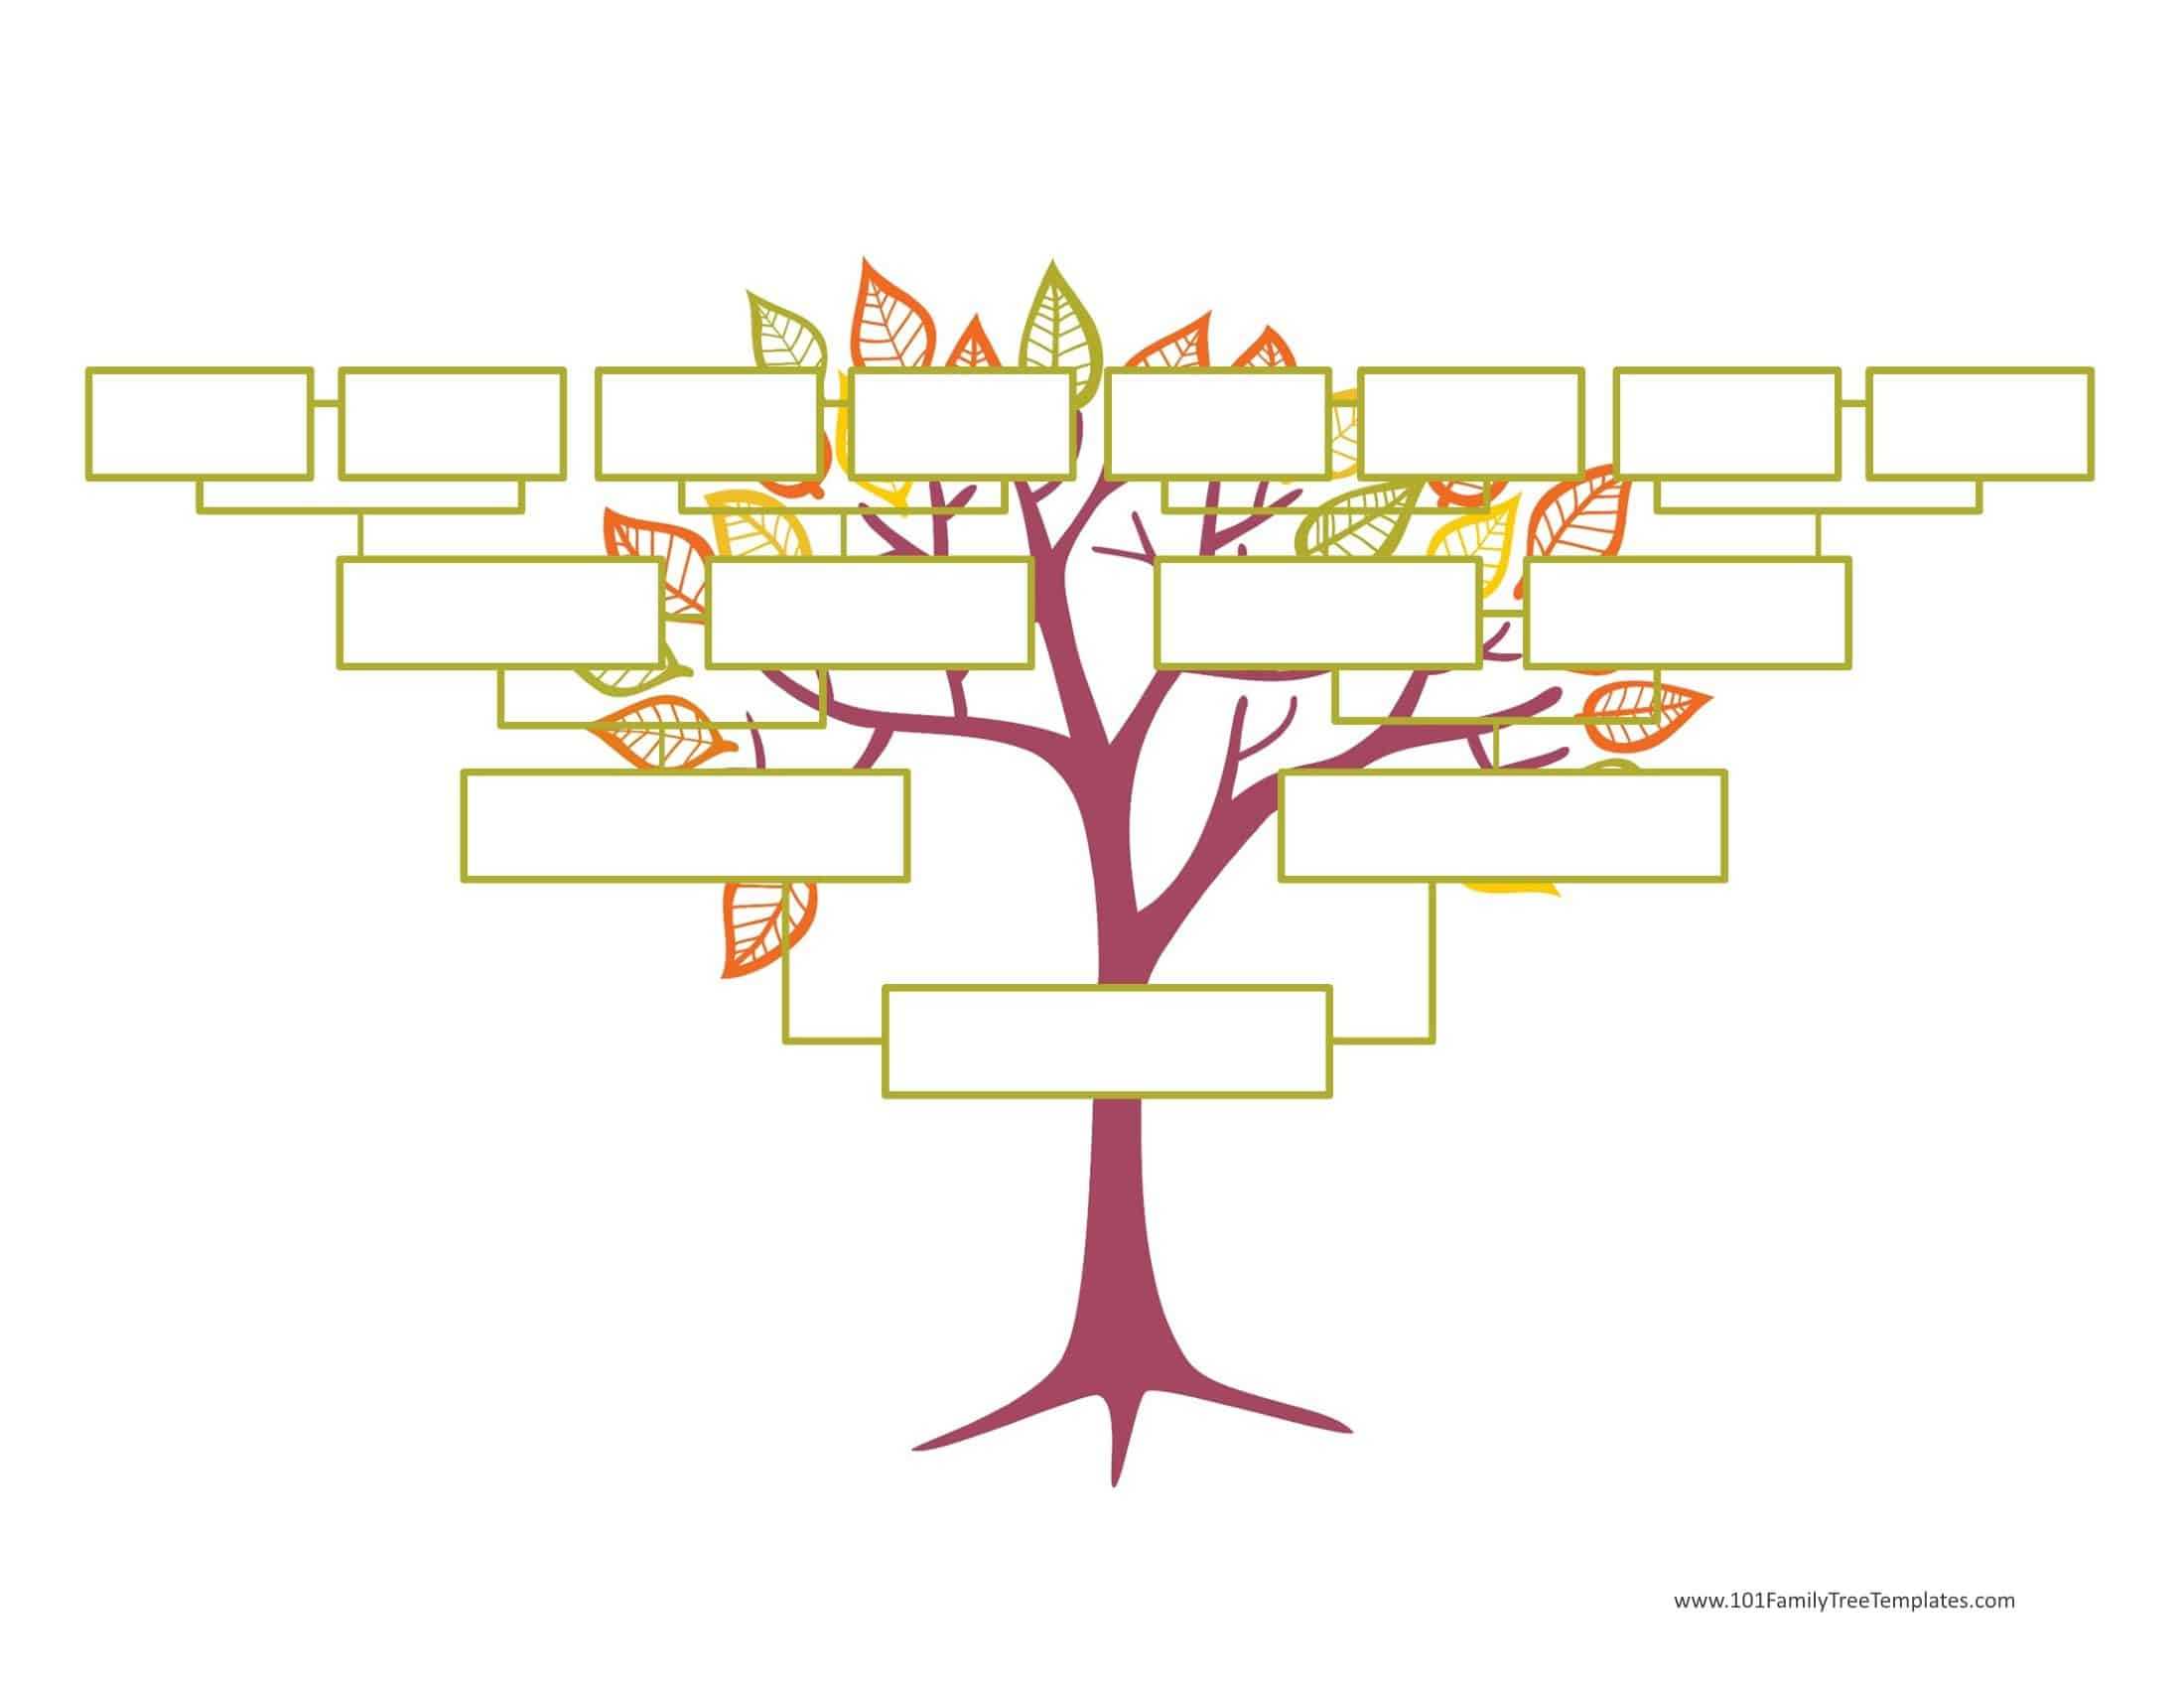 Blank Family Tree Template | Free Instant Download Pertaining To Fill In The Blank Family Tree Template